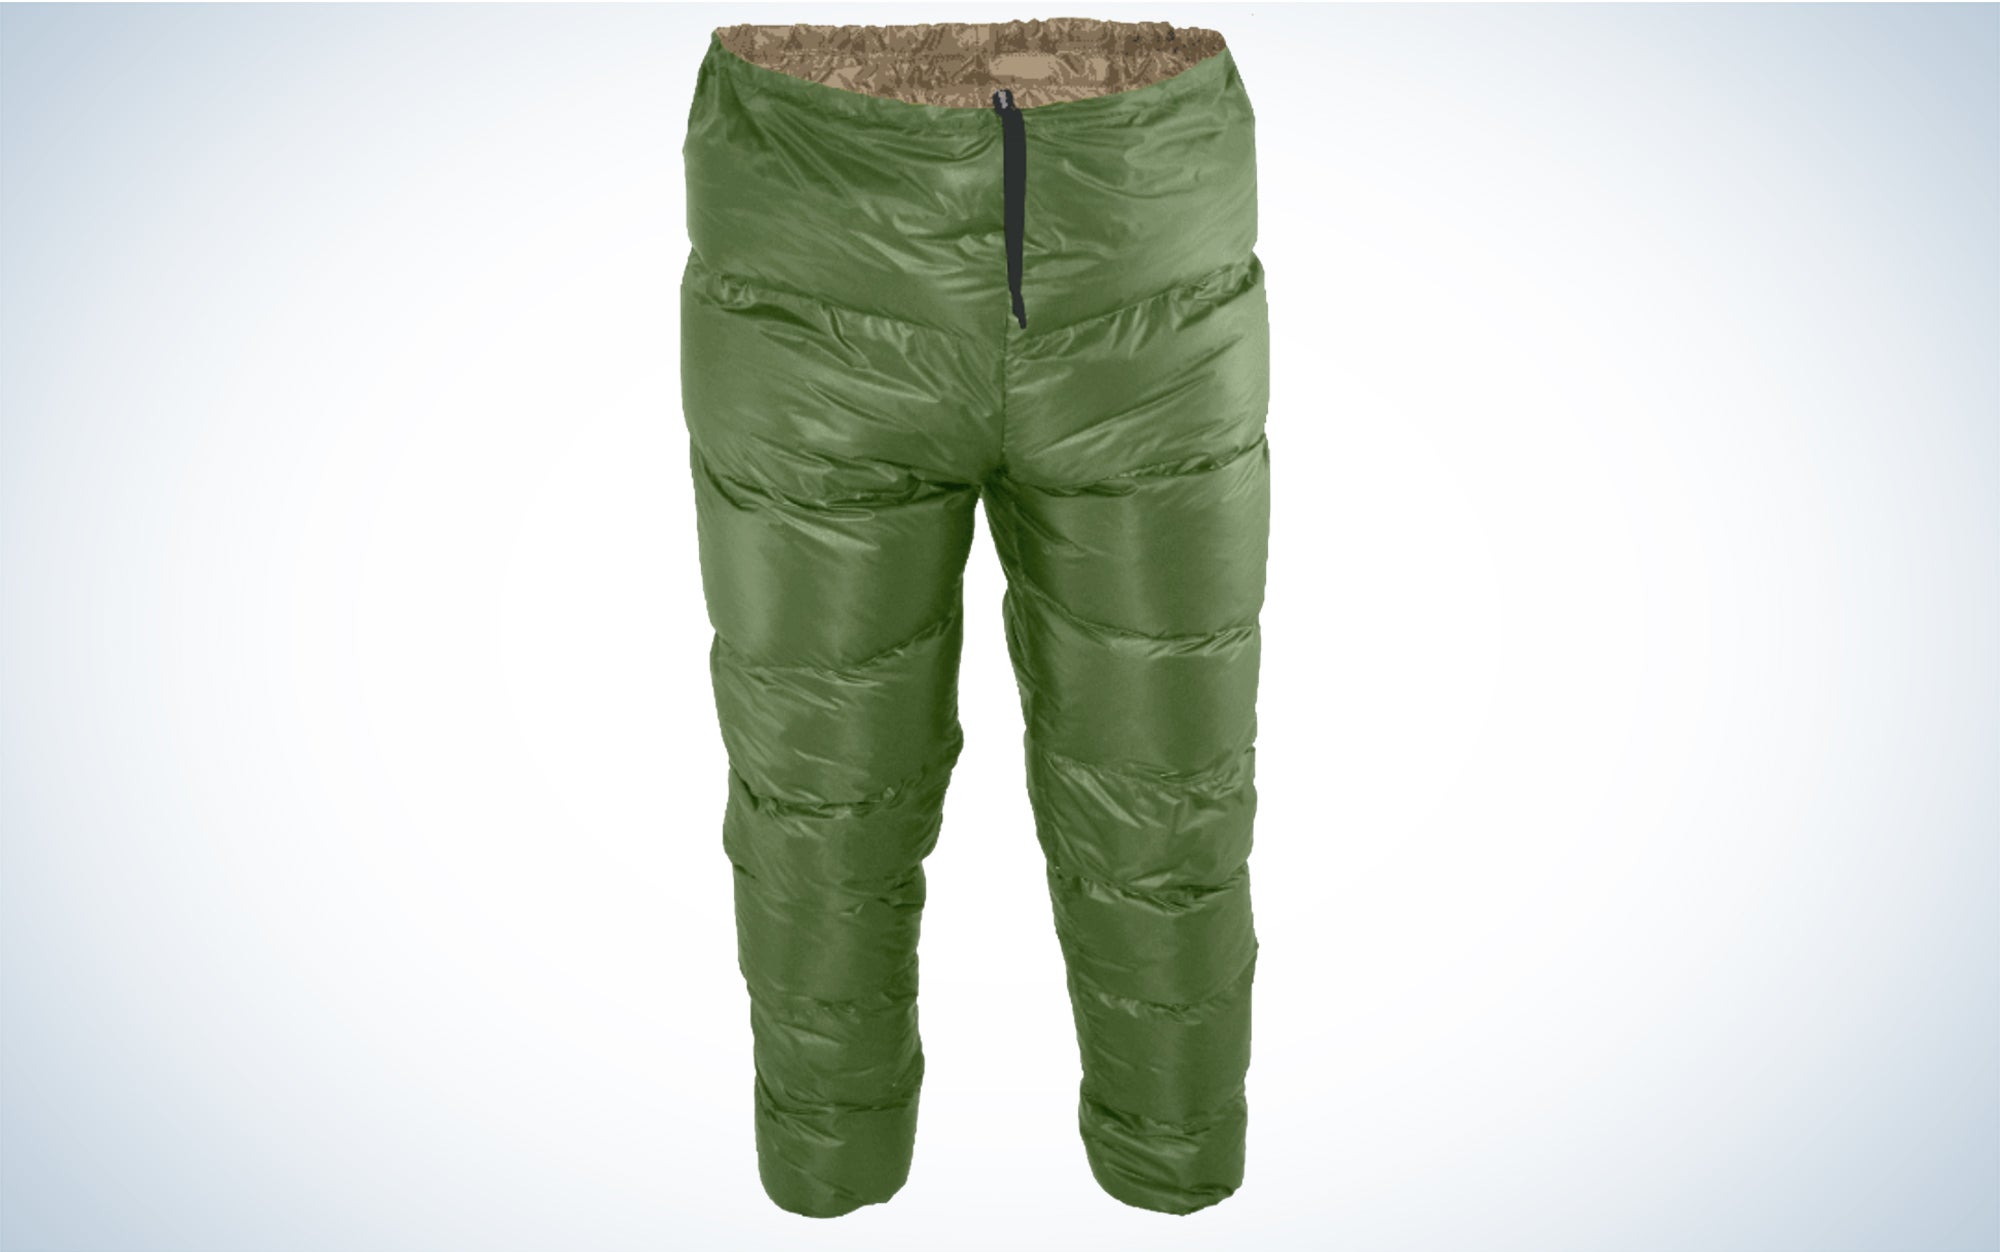 The Goosefeet Gear Down Pants are the most customizable.